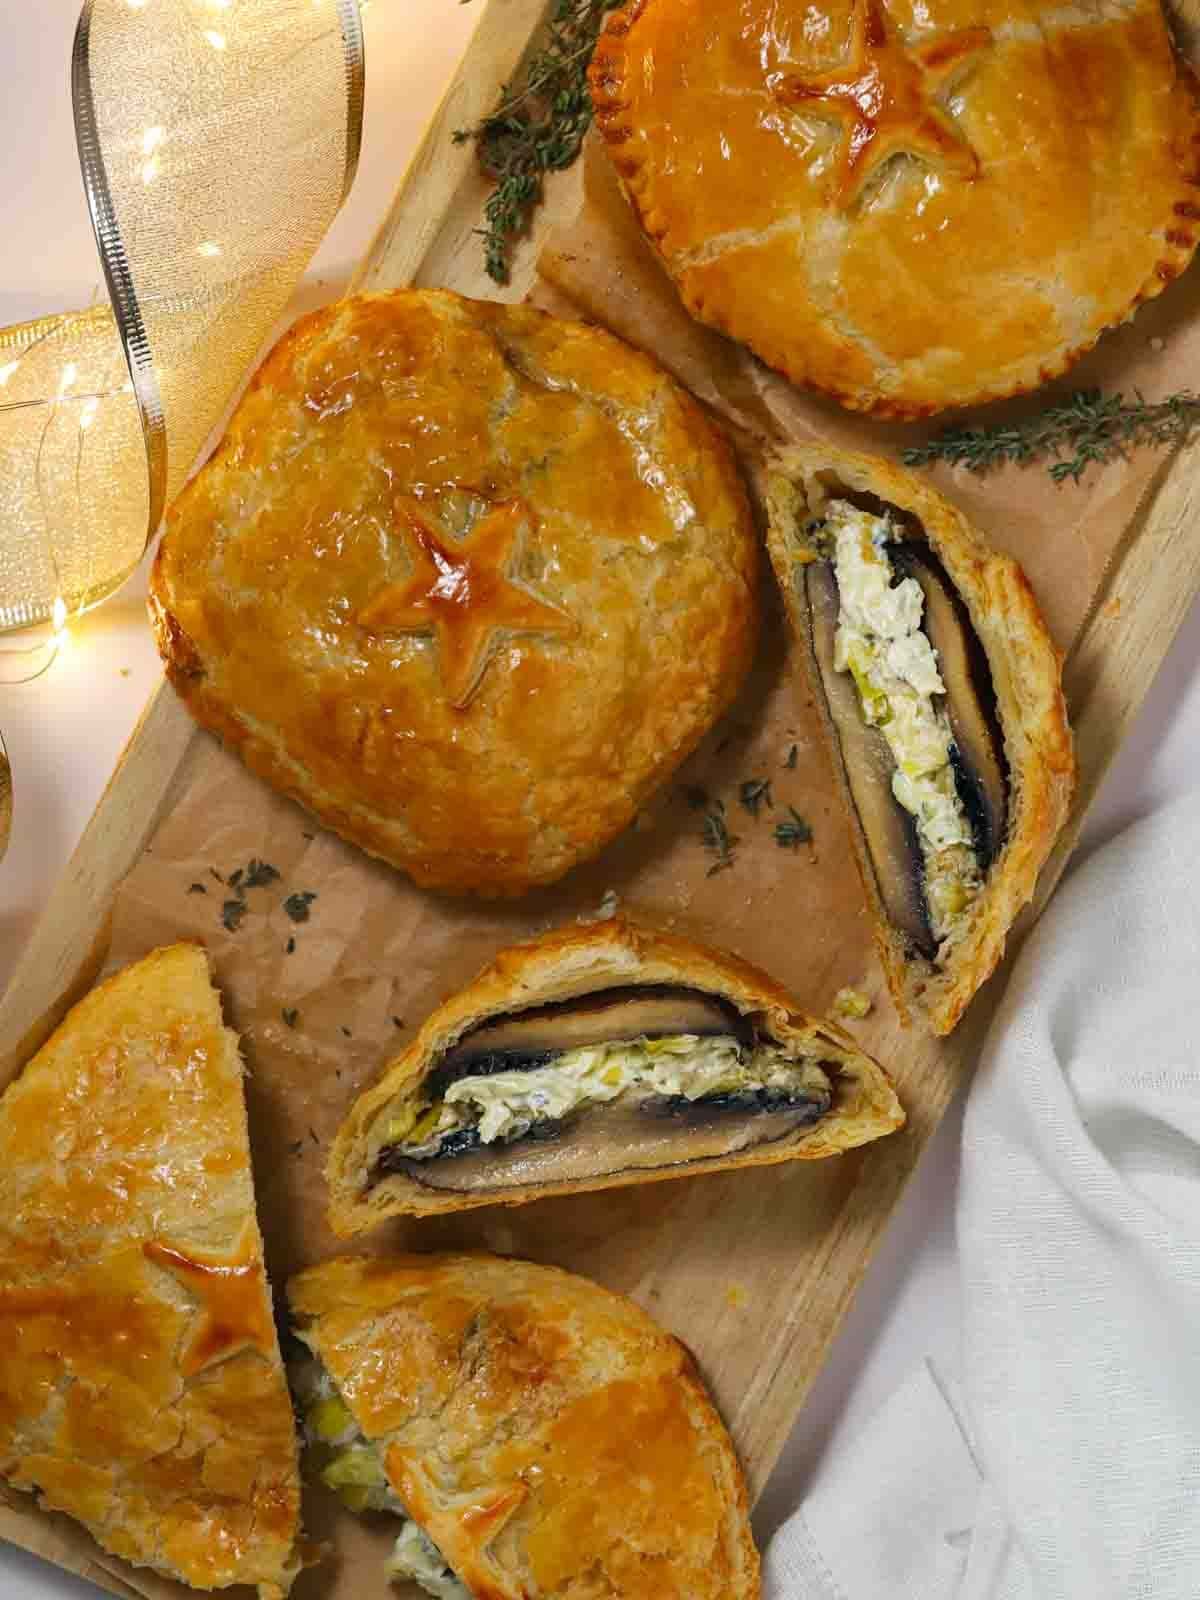 Mushroom wellingtons on a chopping board, one sliced down the middle to show the filling, with twinkly lights at the side and Christmas ribbon.